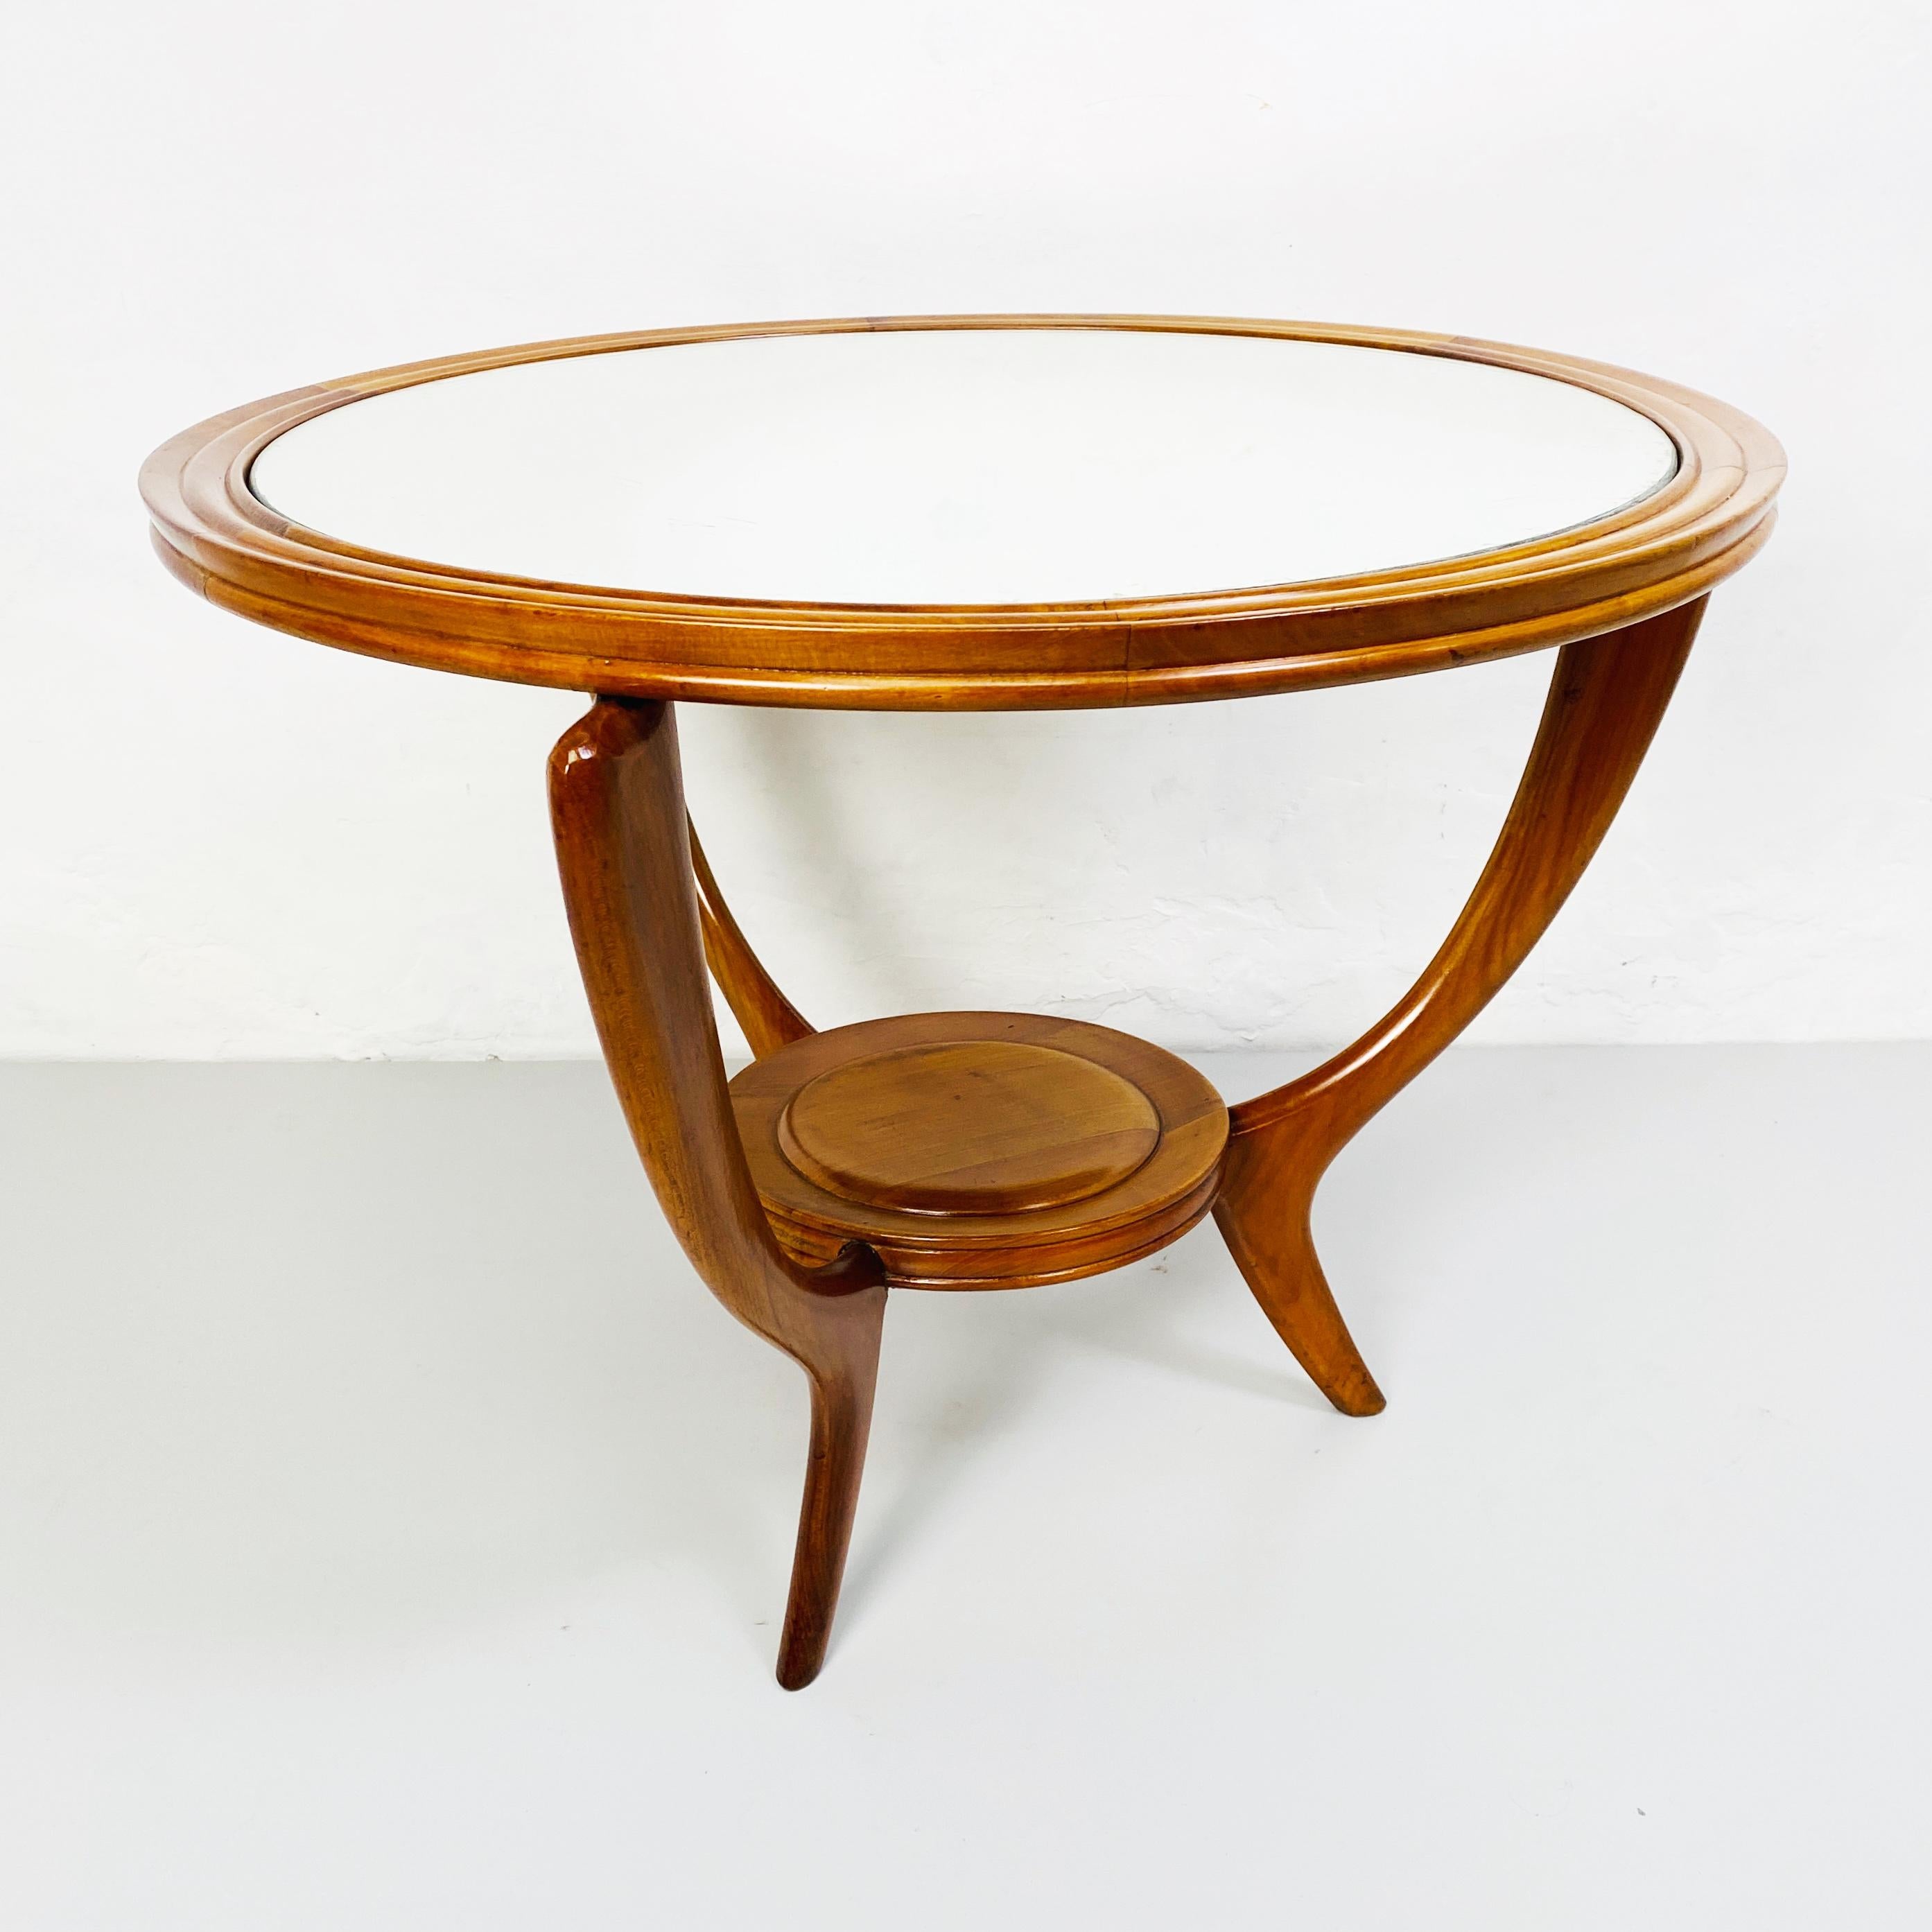 Wood table with mirror, 1950s
Beautiful and elegance circular shape table in solid wood with original mirror on the top and curved legs.

This is a fantastic piece can be used like coffee table or side table near a modern sofa
Original mirror give a